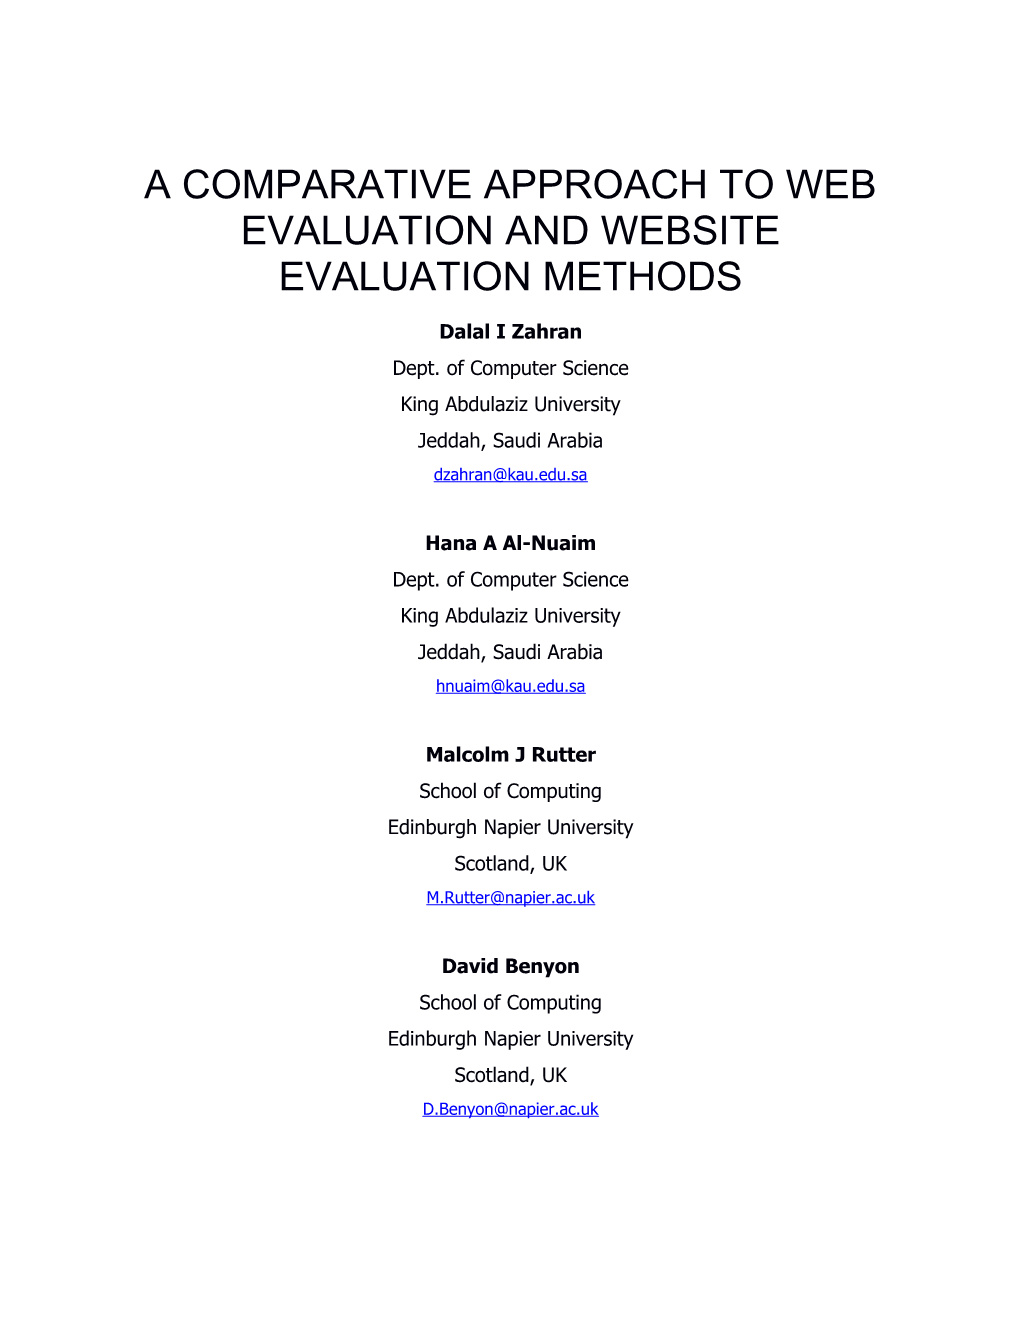 A Comparative Approach to Web Evaluation and Website Evaluation Methods